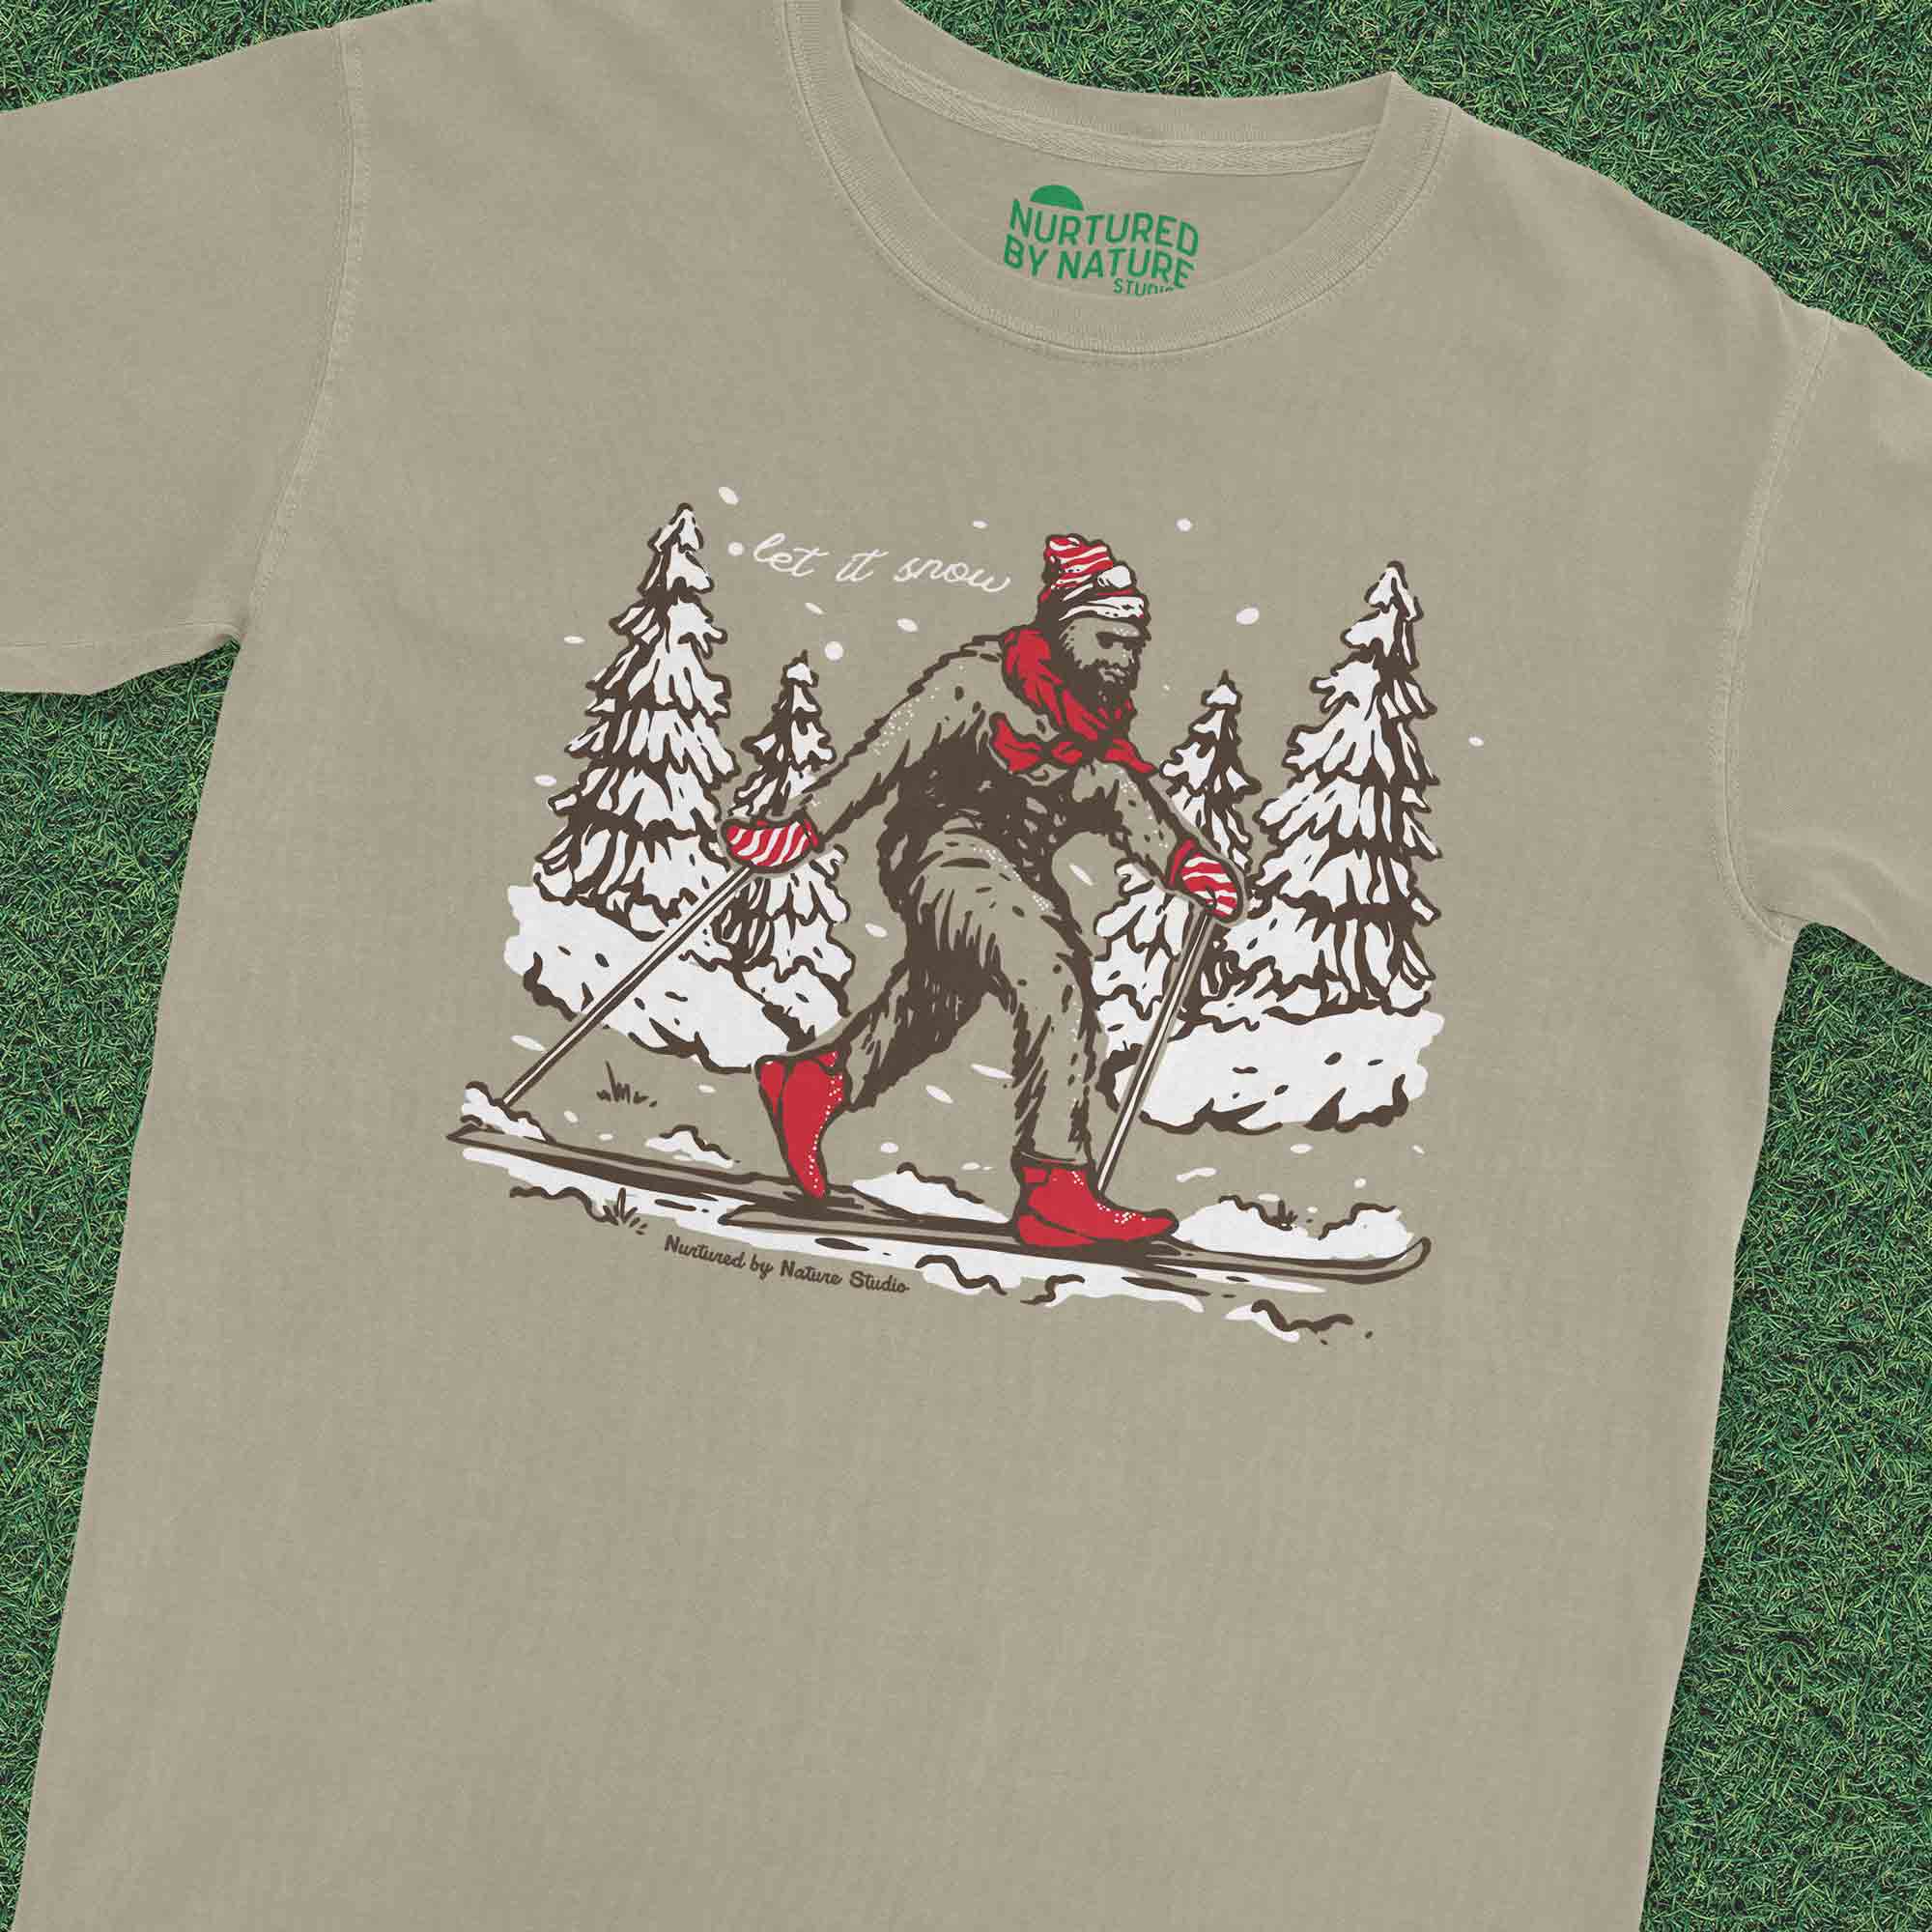 products/Bigfoot-Skiing-in-the-Snow-Nurtured-by-Nature-Studio-Graphic-T-Shirt-on-grass.jpg